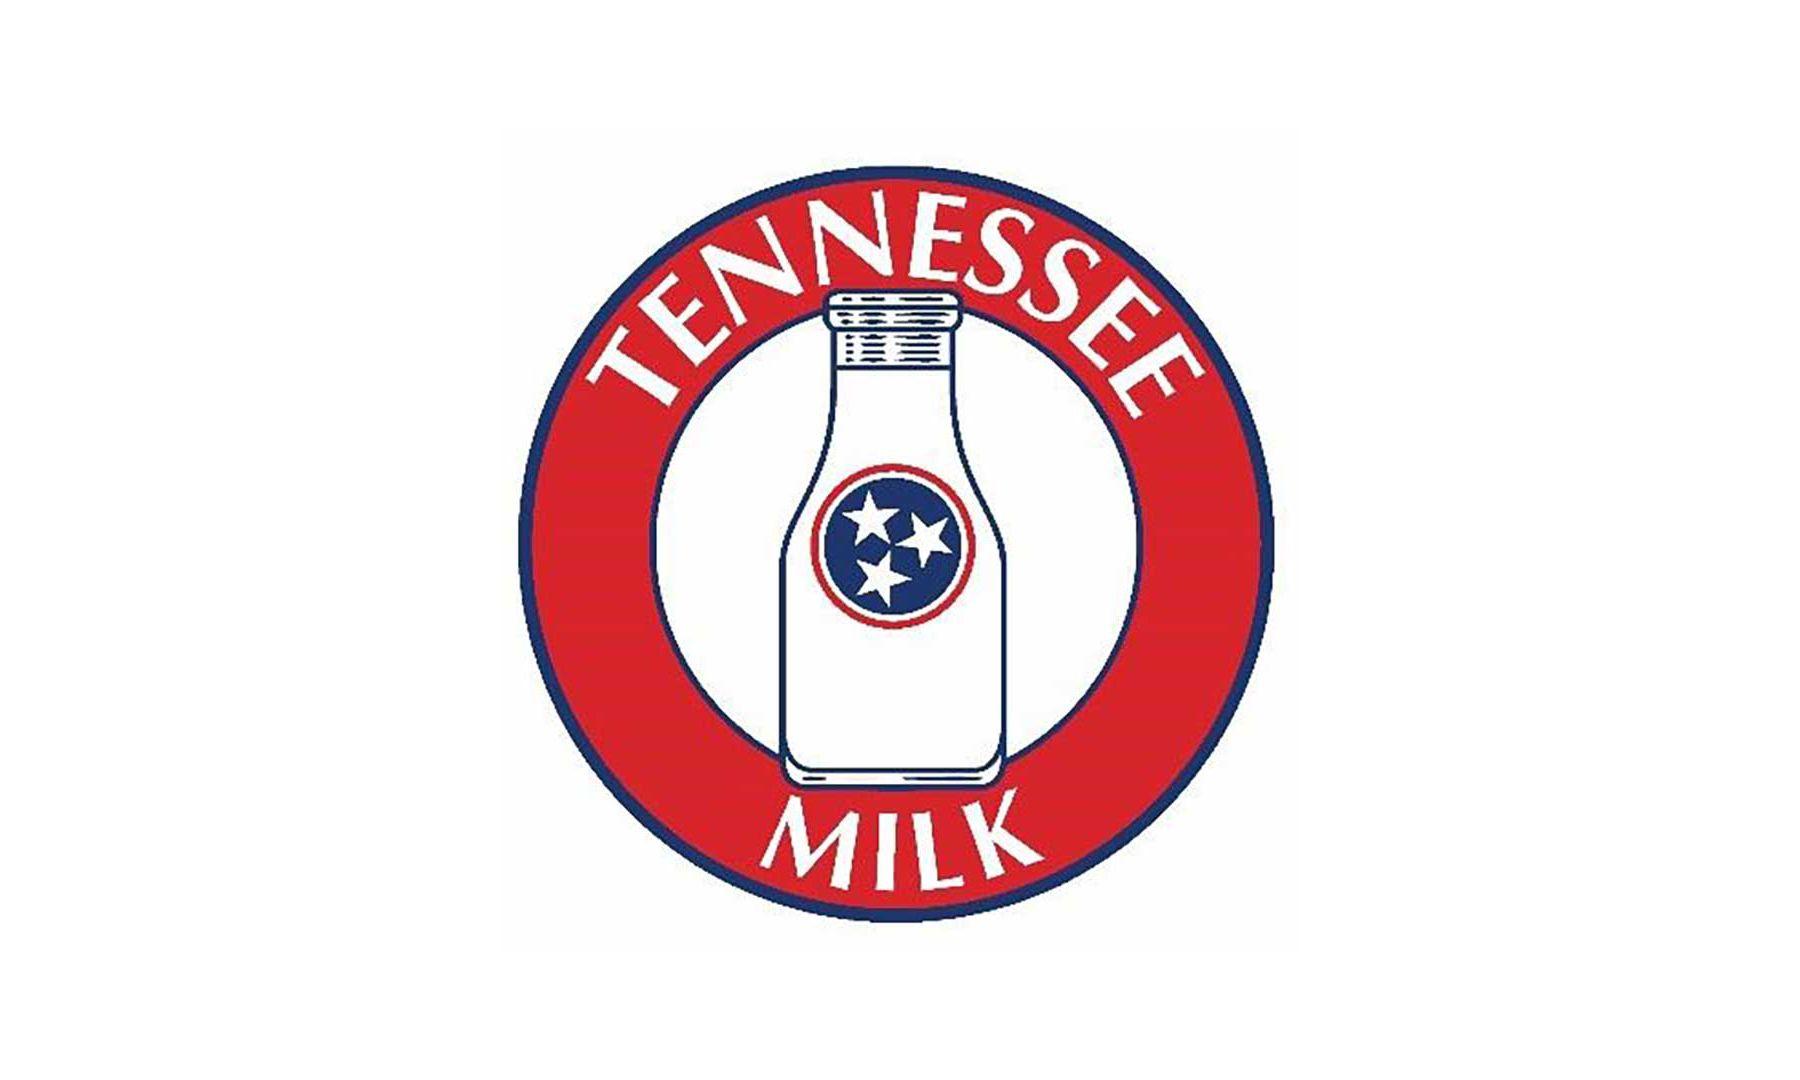 Red Milk Logo - Tennessee Department Of Agriculture Debuts New Tennessee Milk Logo